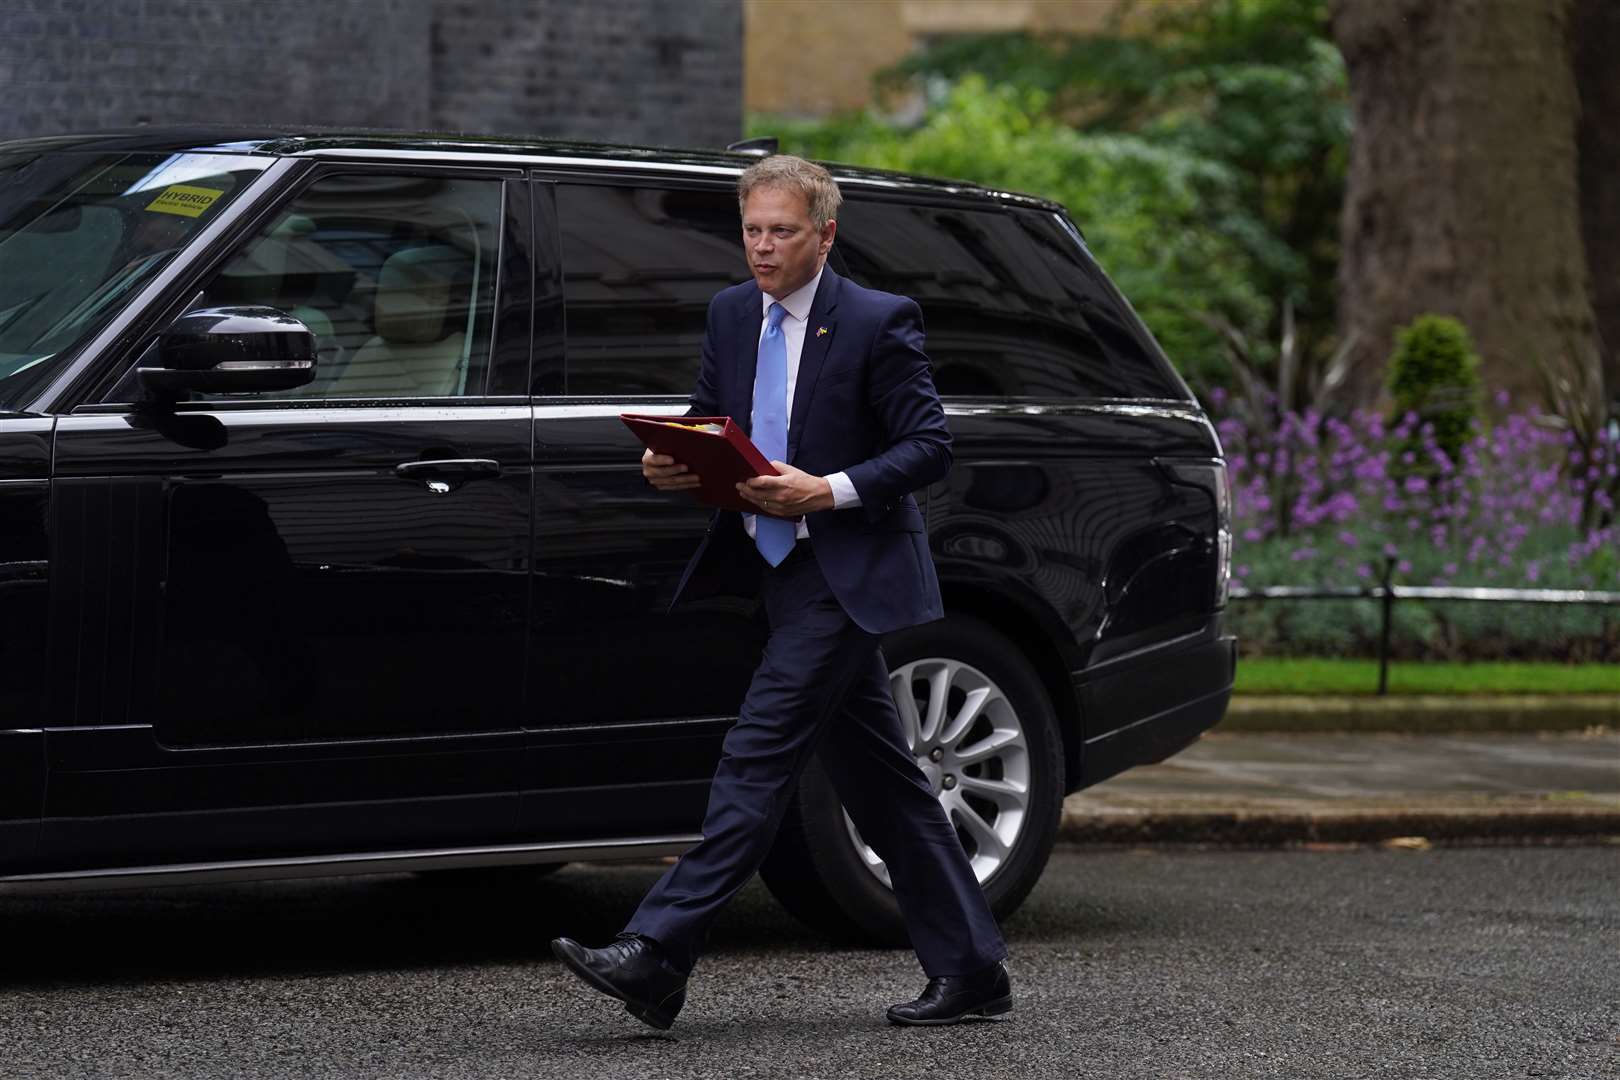 Transport Secretary Grant Shapps backed the Prime Minister in the face of speculation that a confidence vote is imminent (Stefan Rousseau/PA)